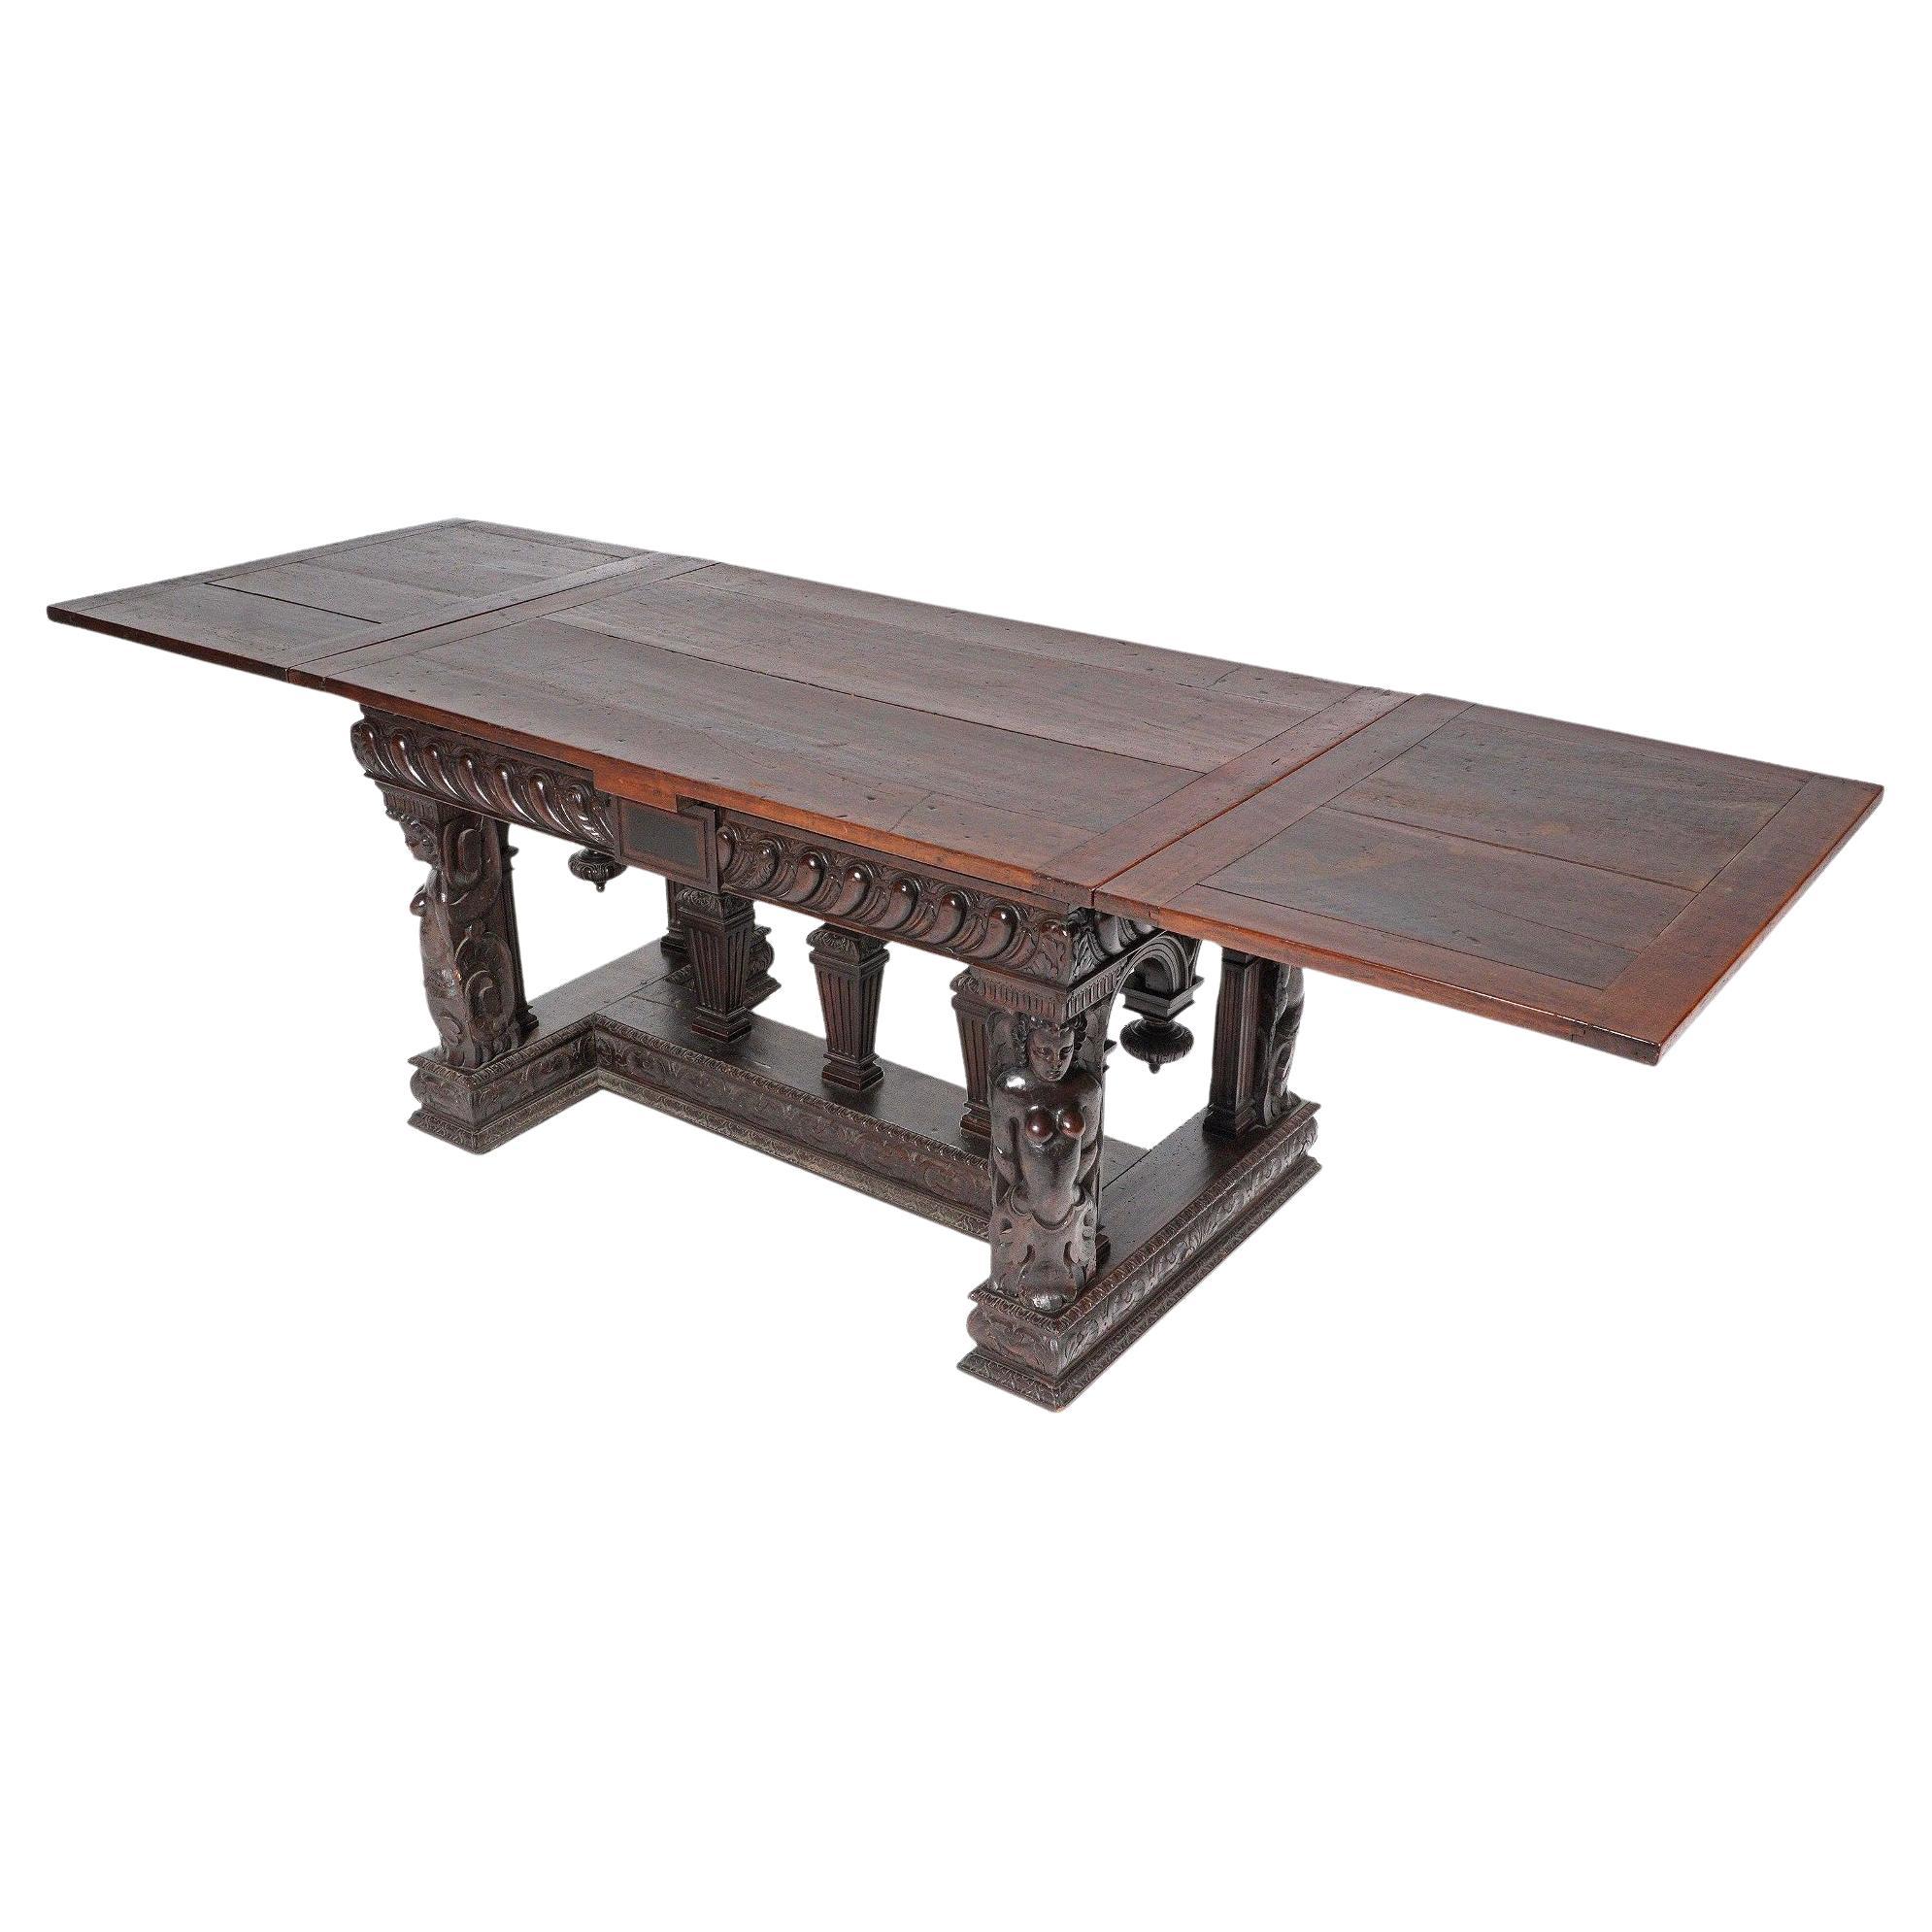 Spectacular 18th Century Carved Walnut Renaissance Style Library Table - dining table. With a rectangular top concealing draw leaves at either end, on richly carved figural maiden carved corner legs, carved and gadrooned skirt and three carved